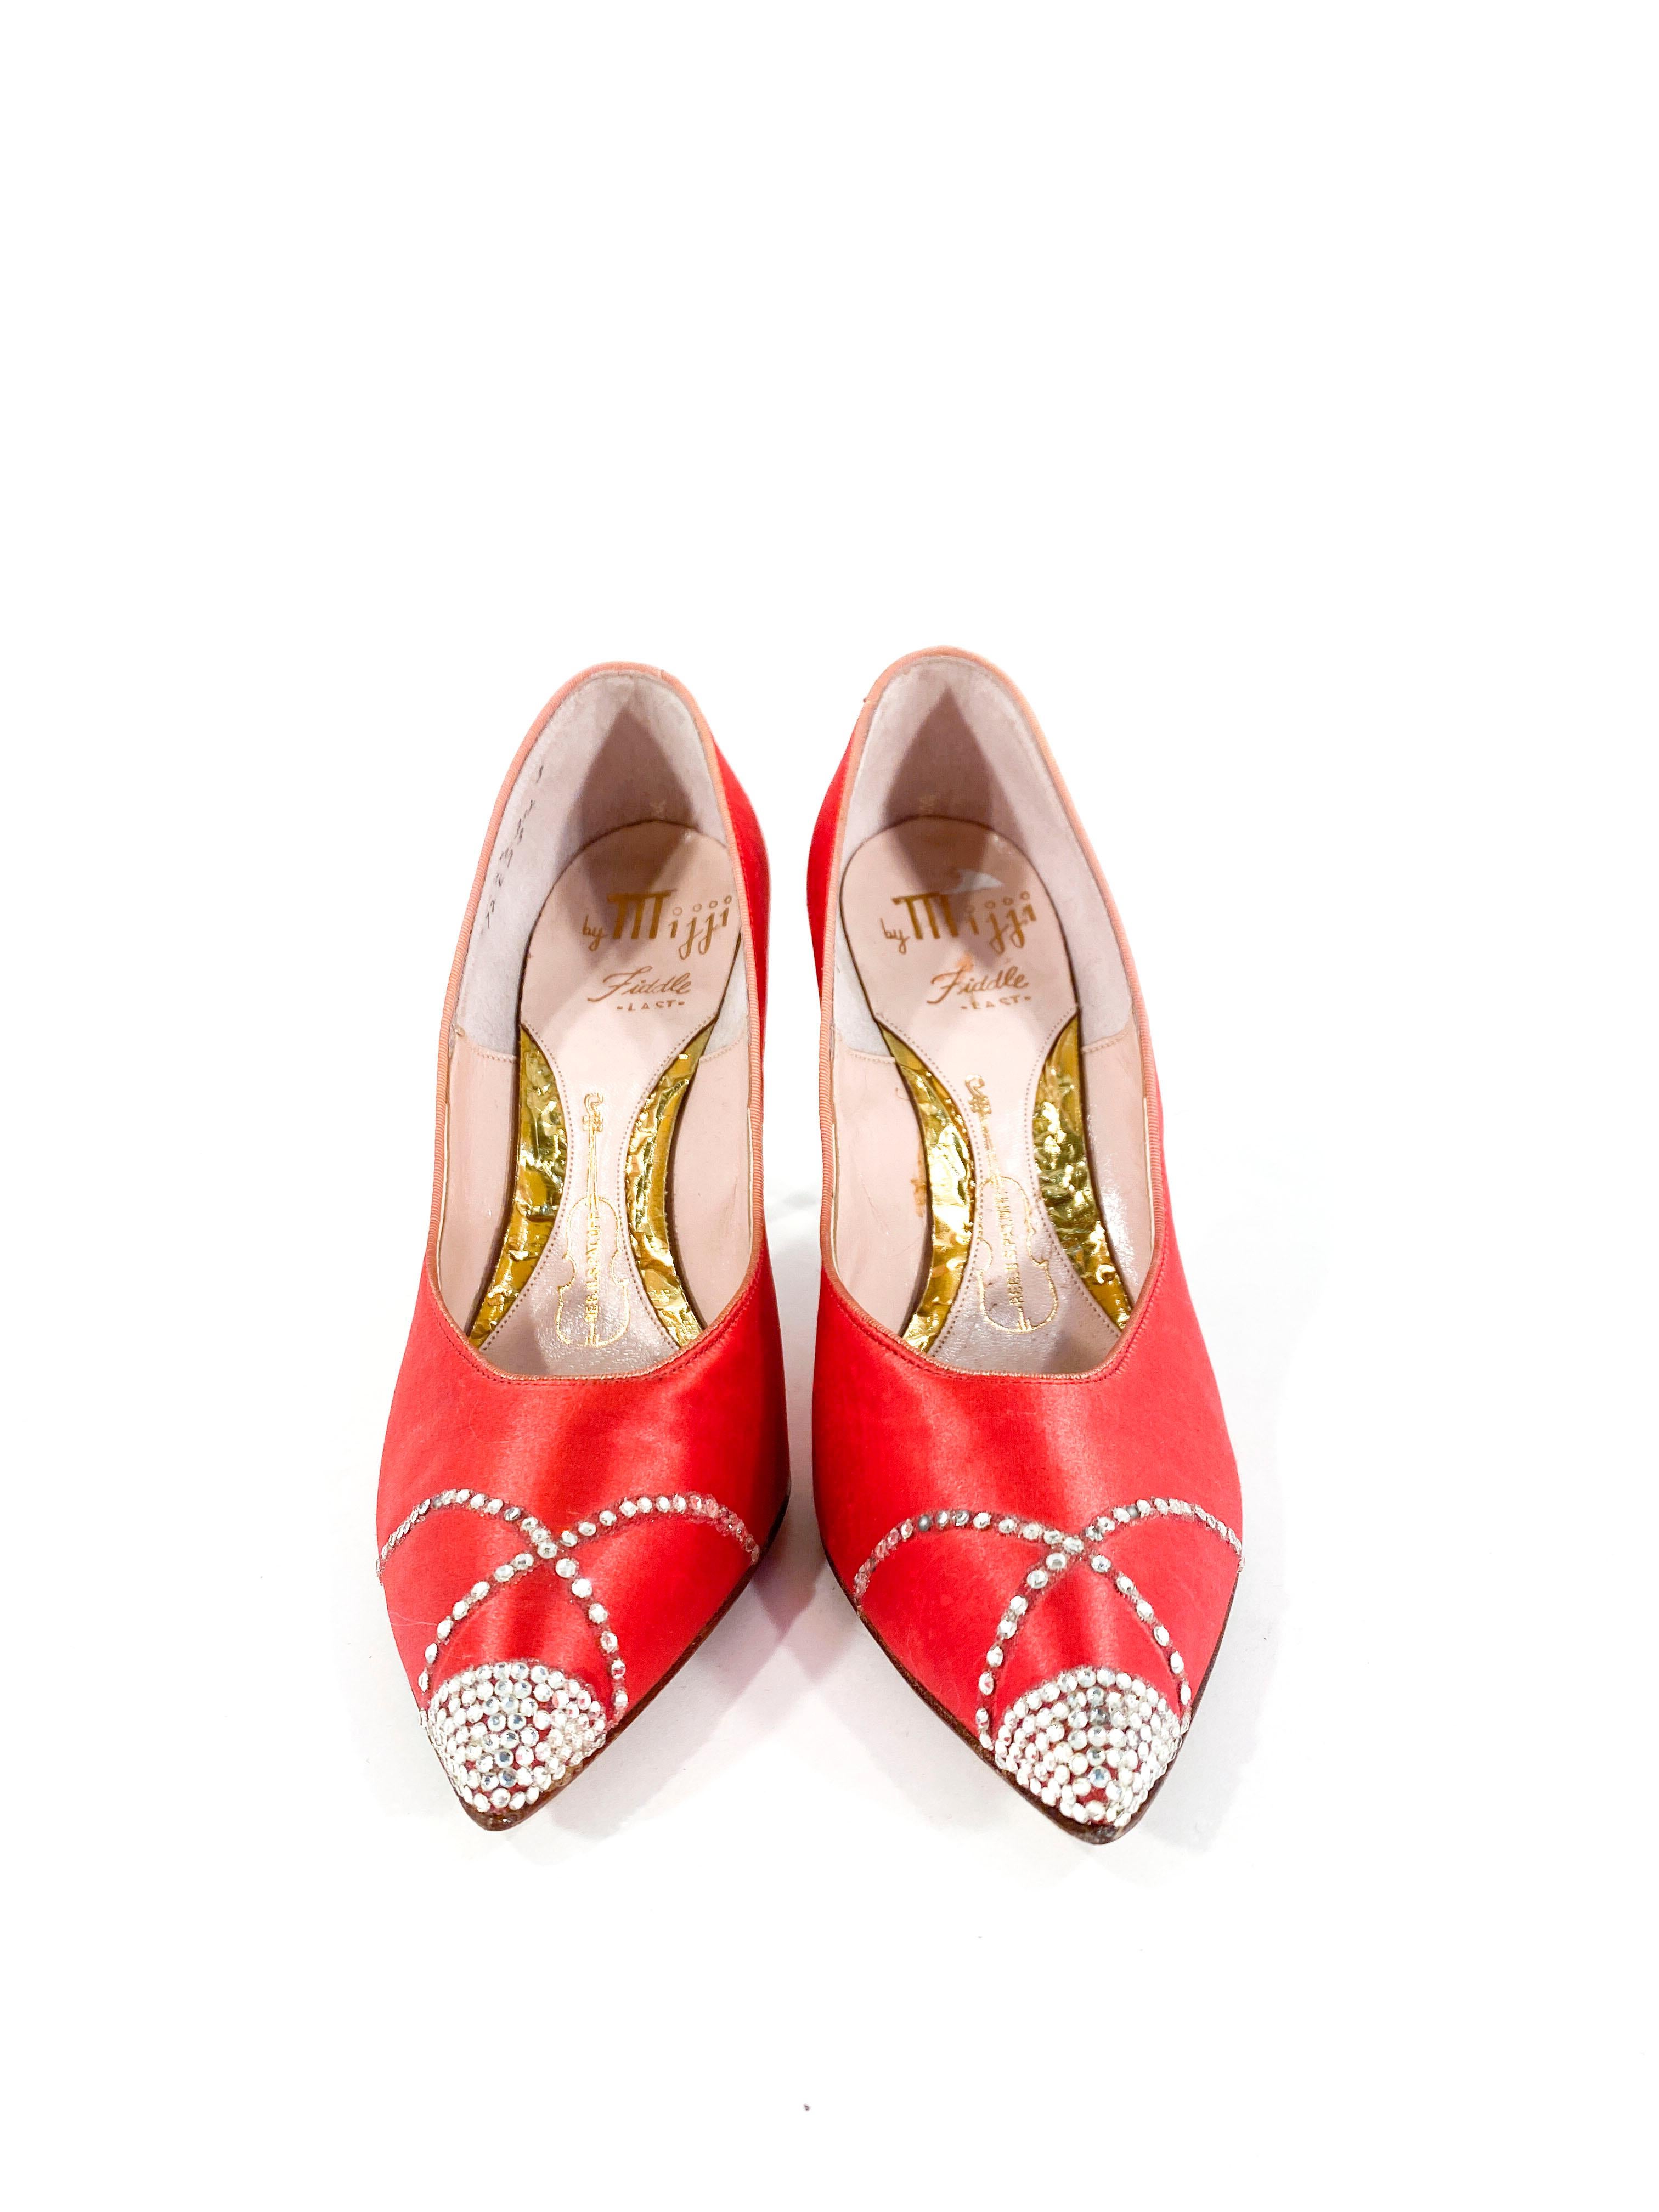 1960s red stain stiletto heels with multi-patterned rhinestone accents on the pointed toe. 